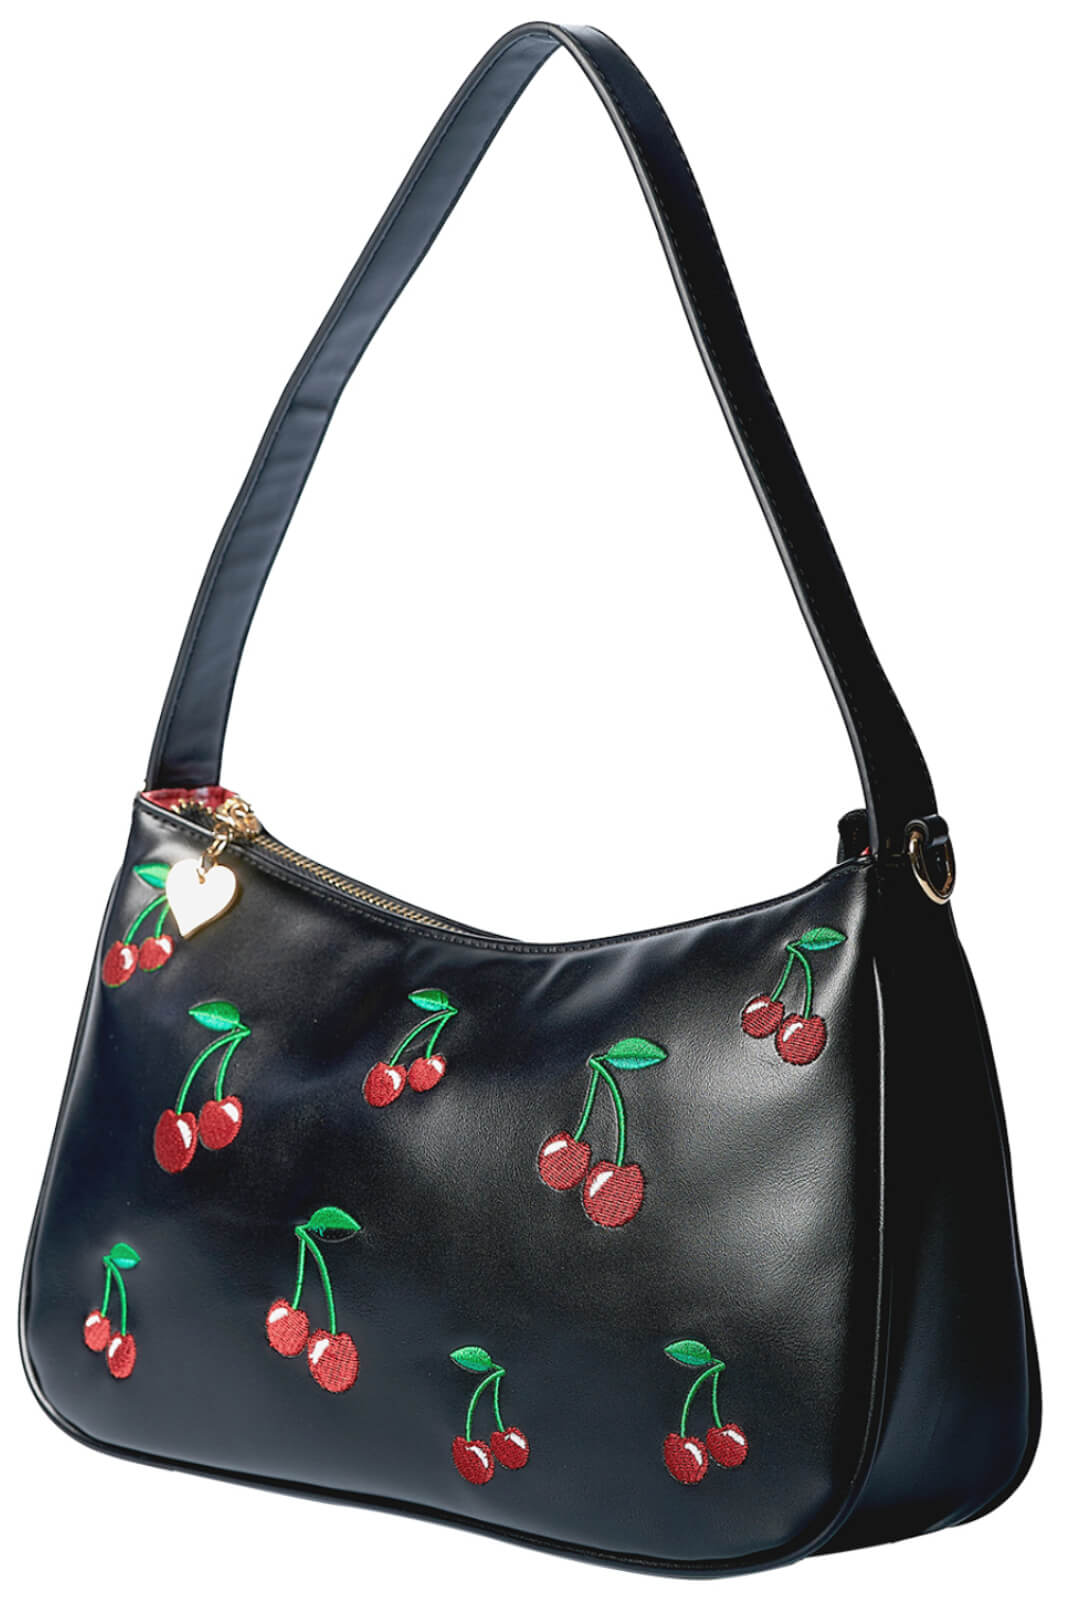 Banned Wild Cherry Embroidered Shoulder Bag, Black, One-Size